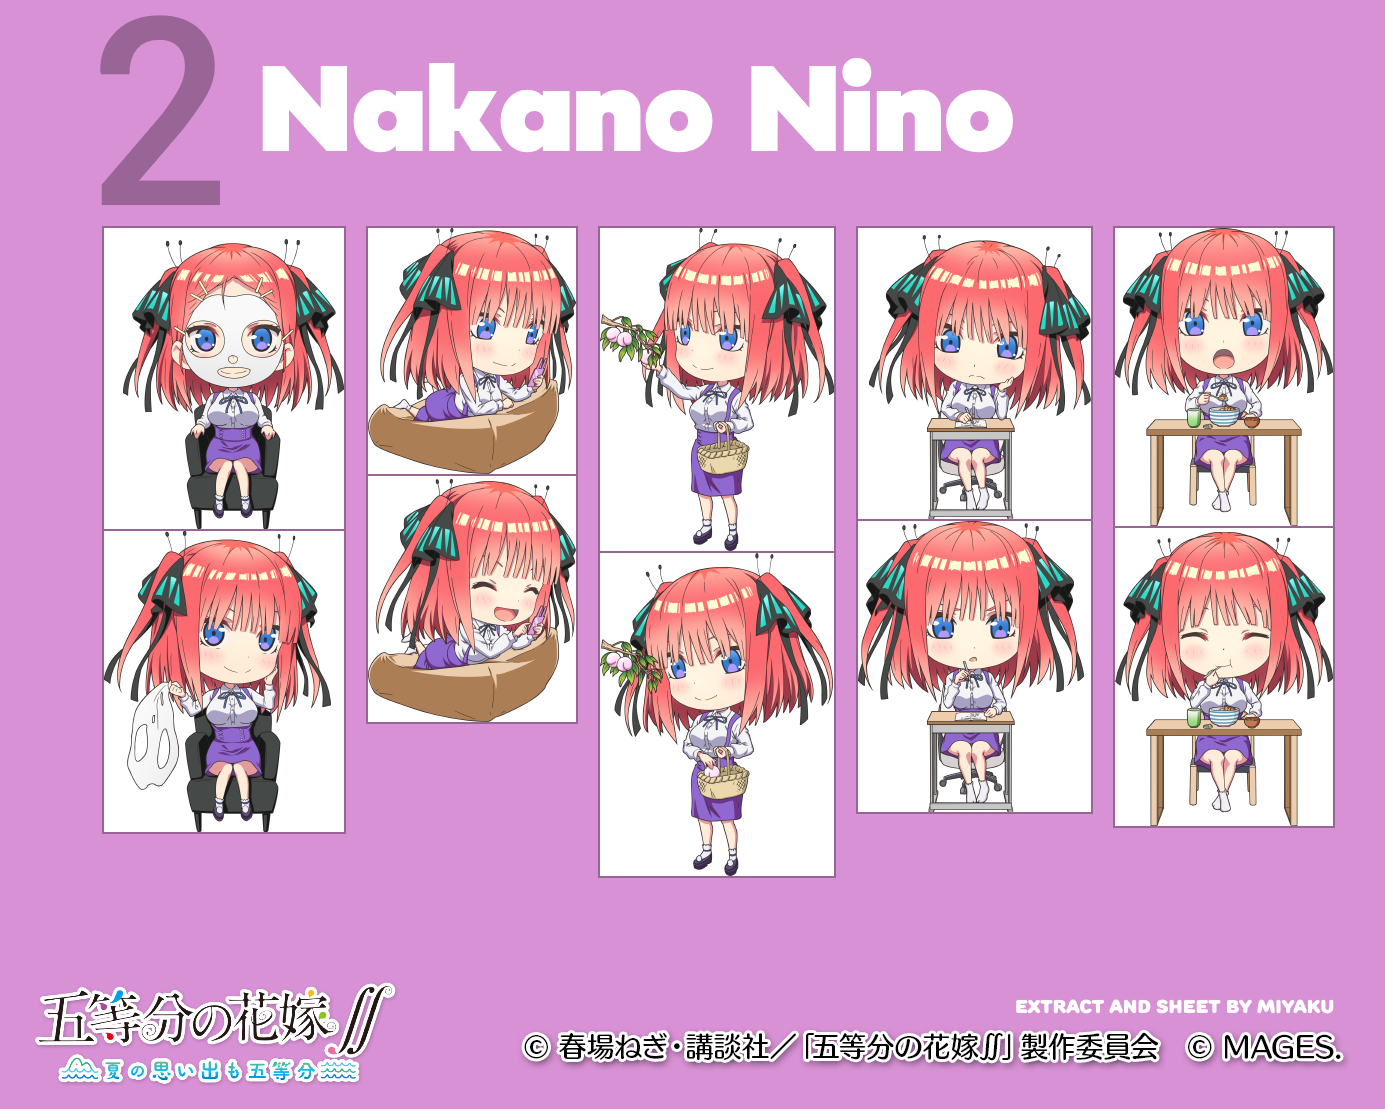 The Quintessential Quintuplets ∬: Summer Memories Also Come in Five - Nino Nakano (Chibi)